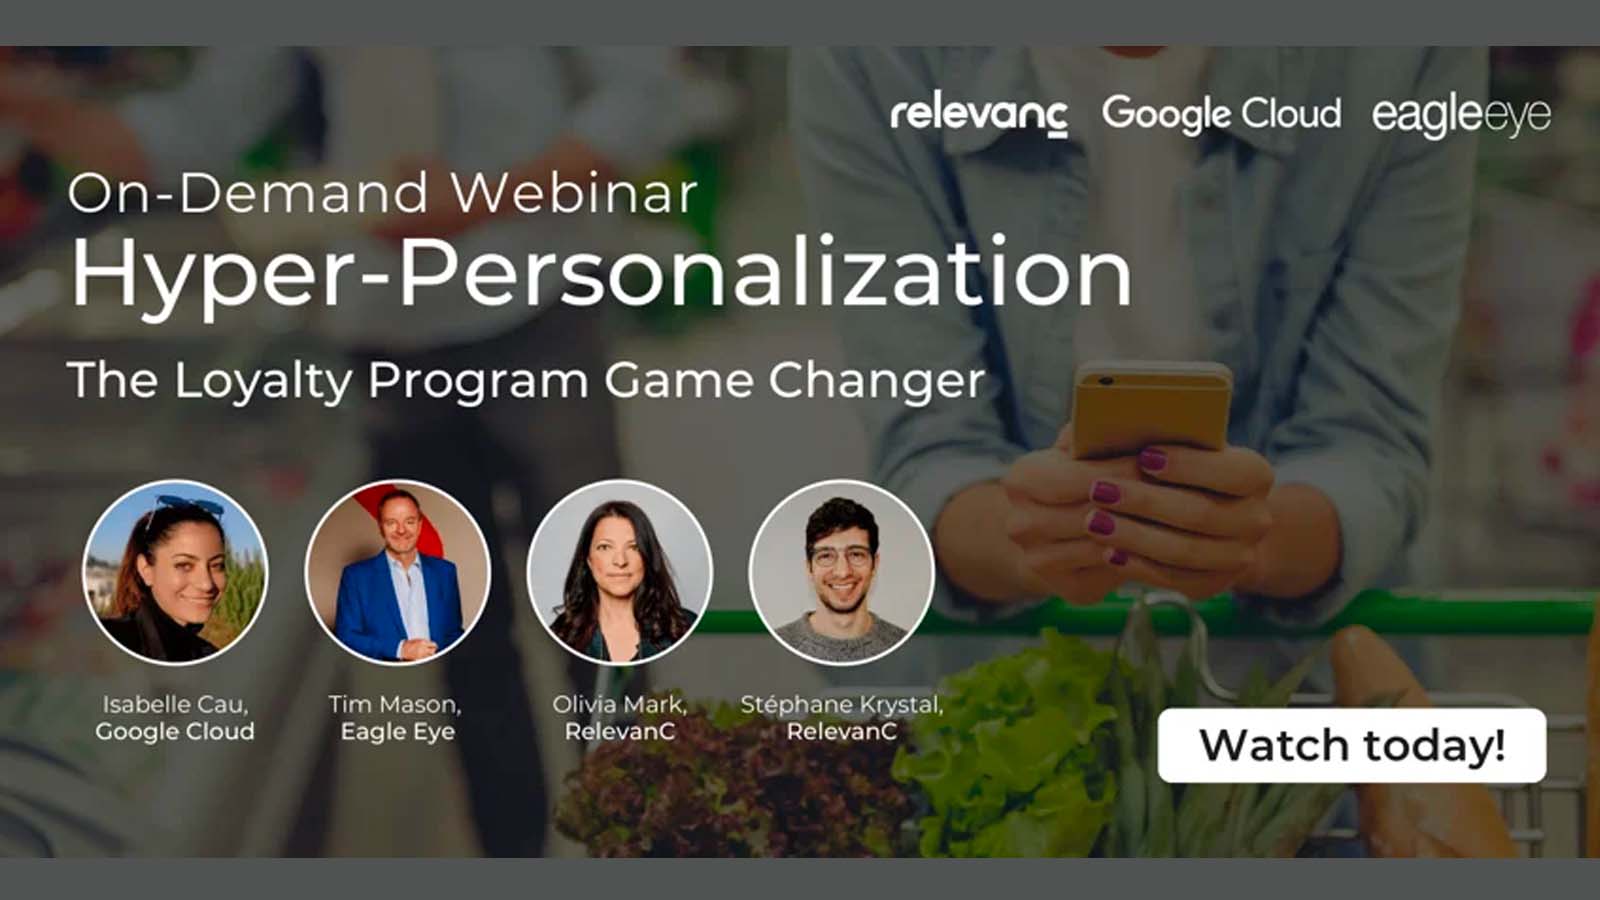 Hyper-Personalization: The Loyalty Program Game Changer